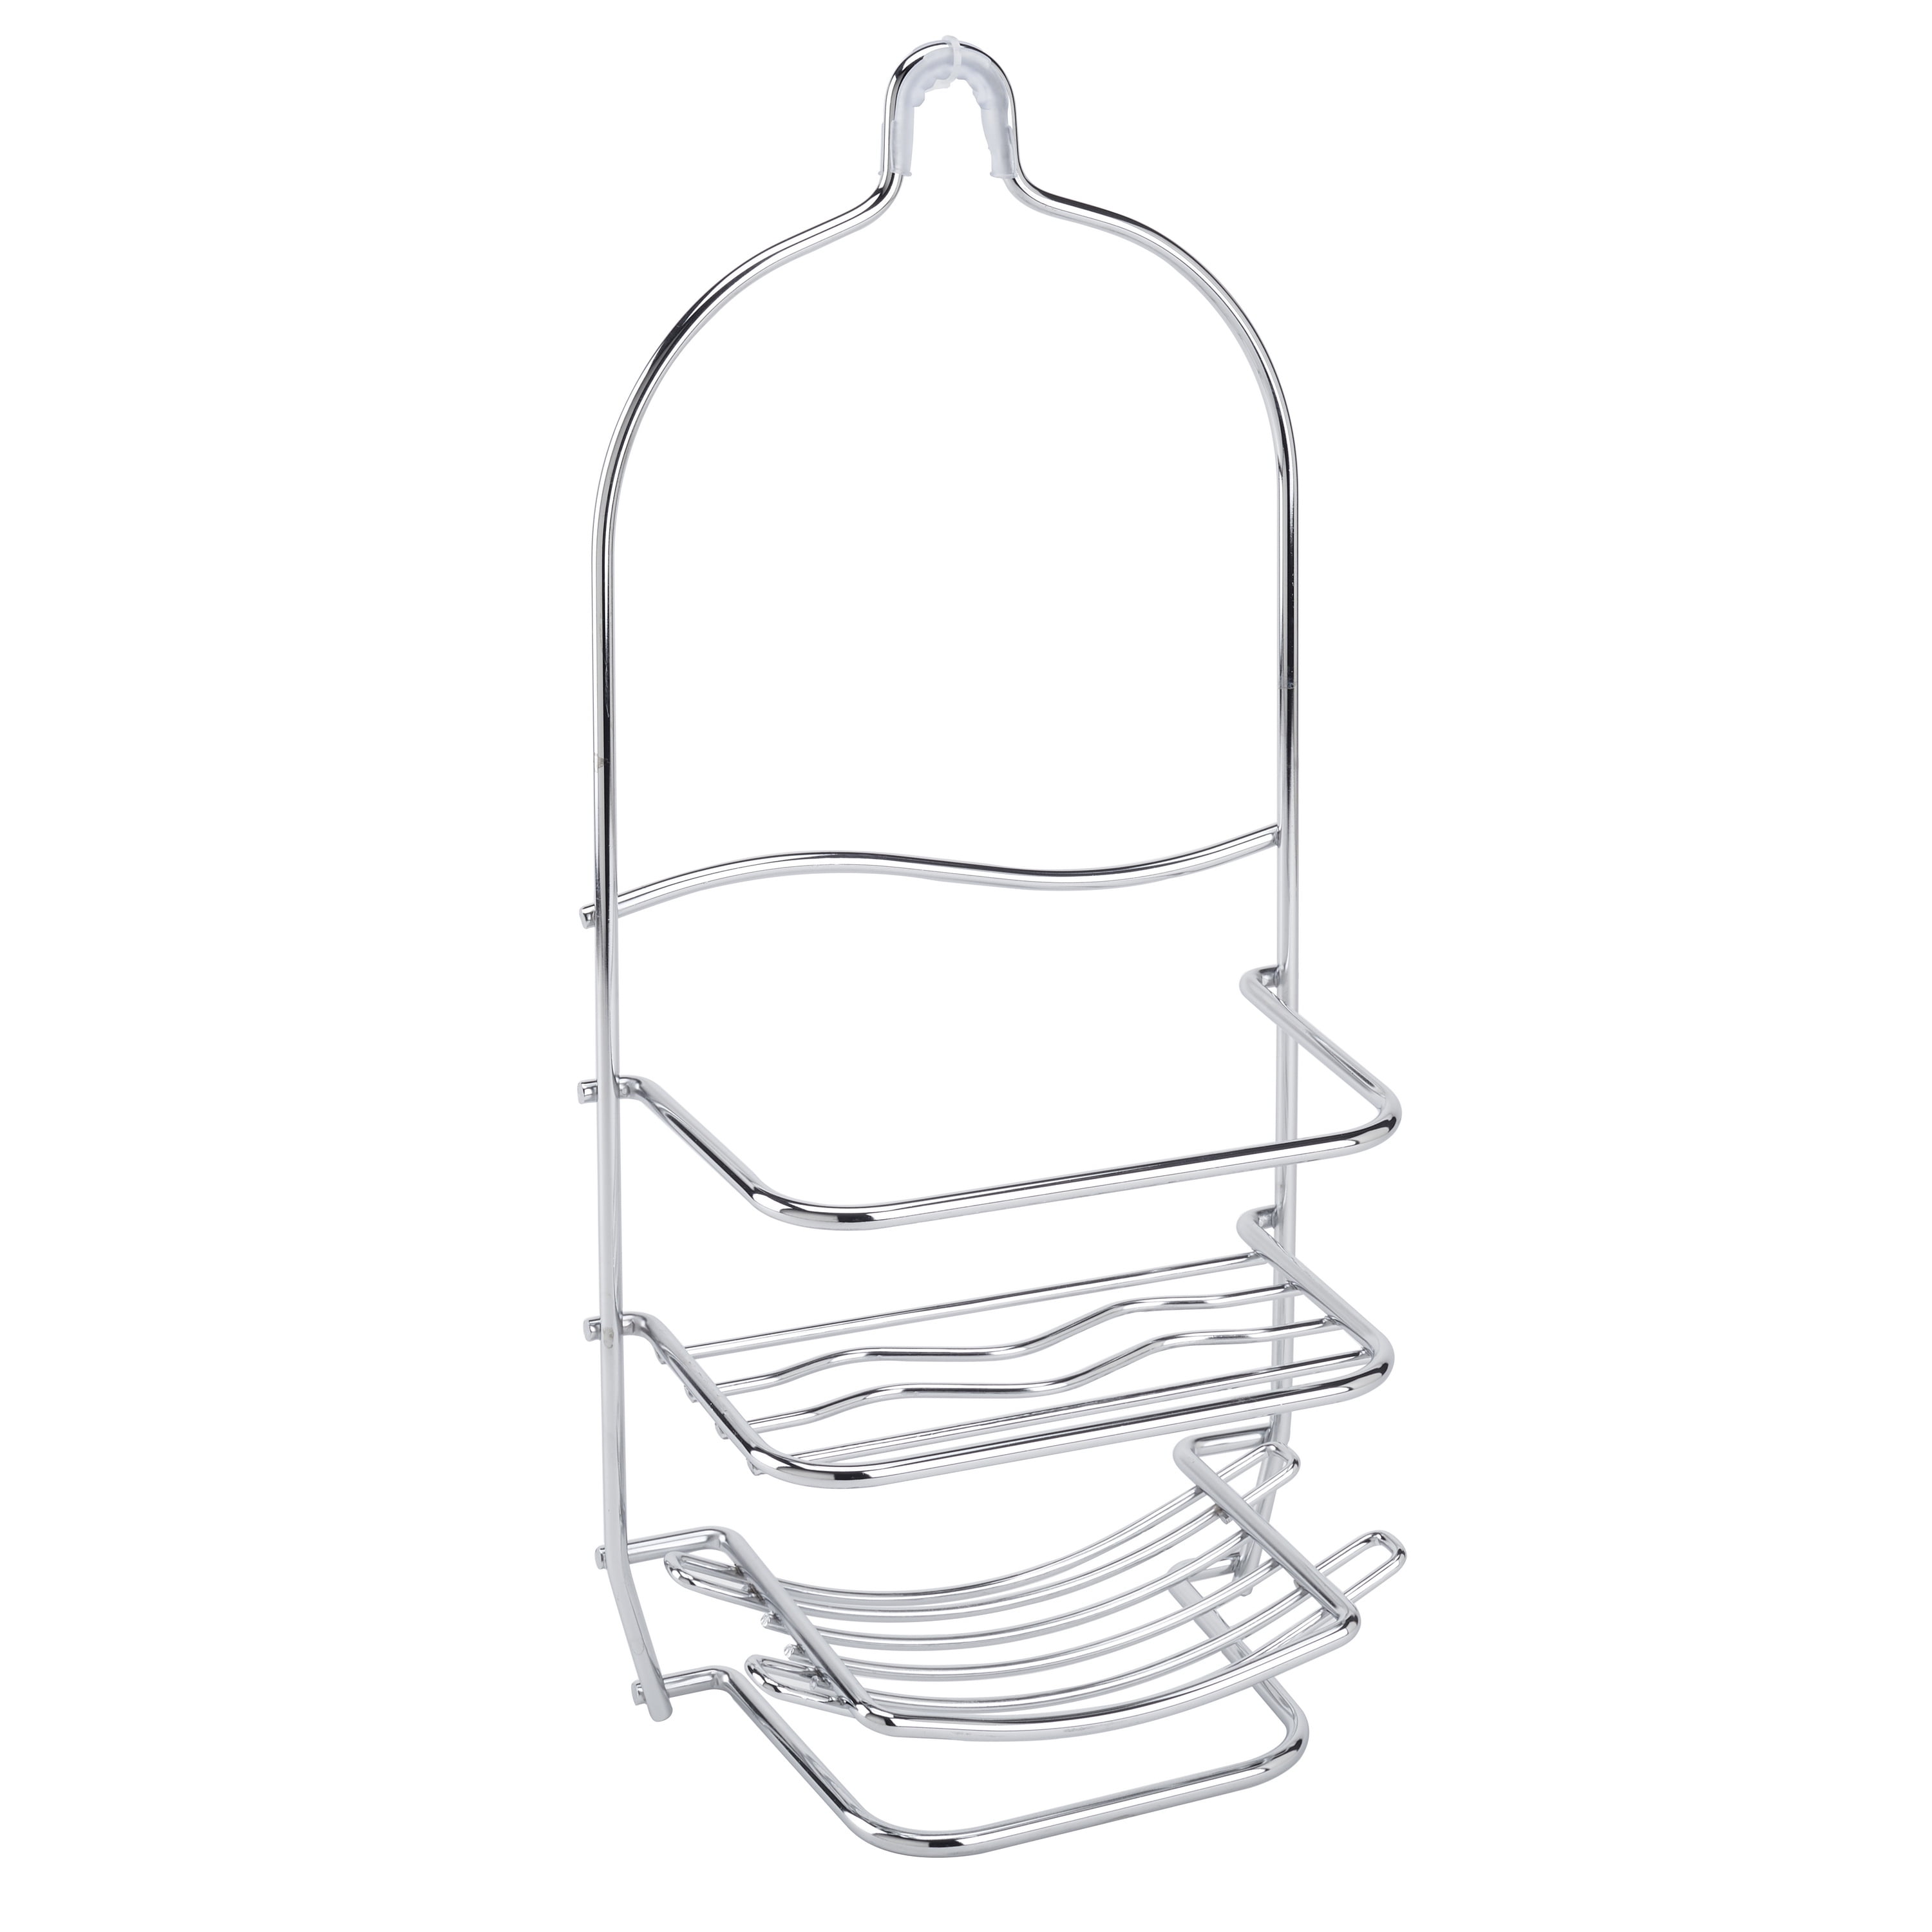 Bath Bliss Shower Caddy In Chrome With Clear Ends - 9 x 4.3 x